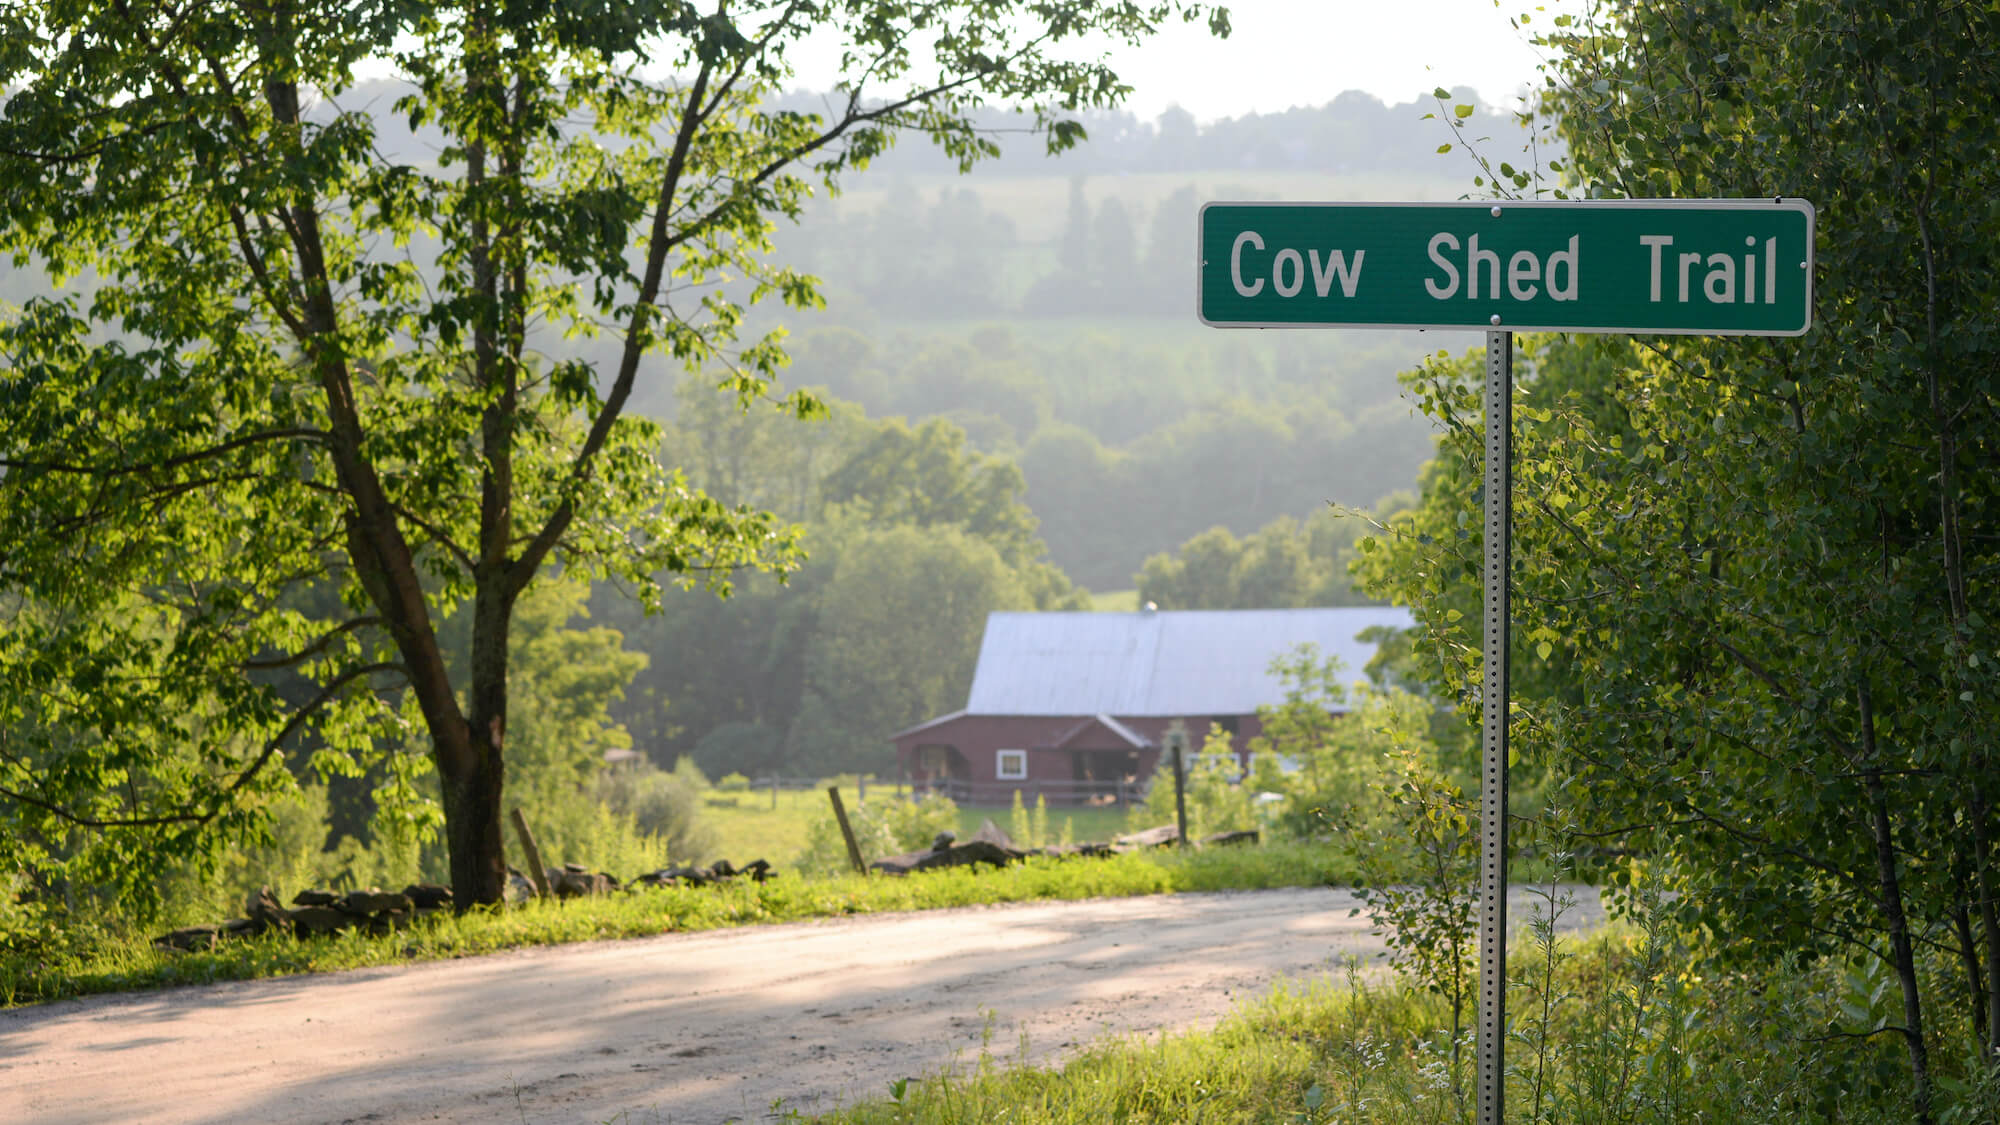 Scenery from the VT100 course, featuring a road sign for Cow Shed Trail.